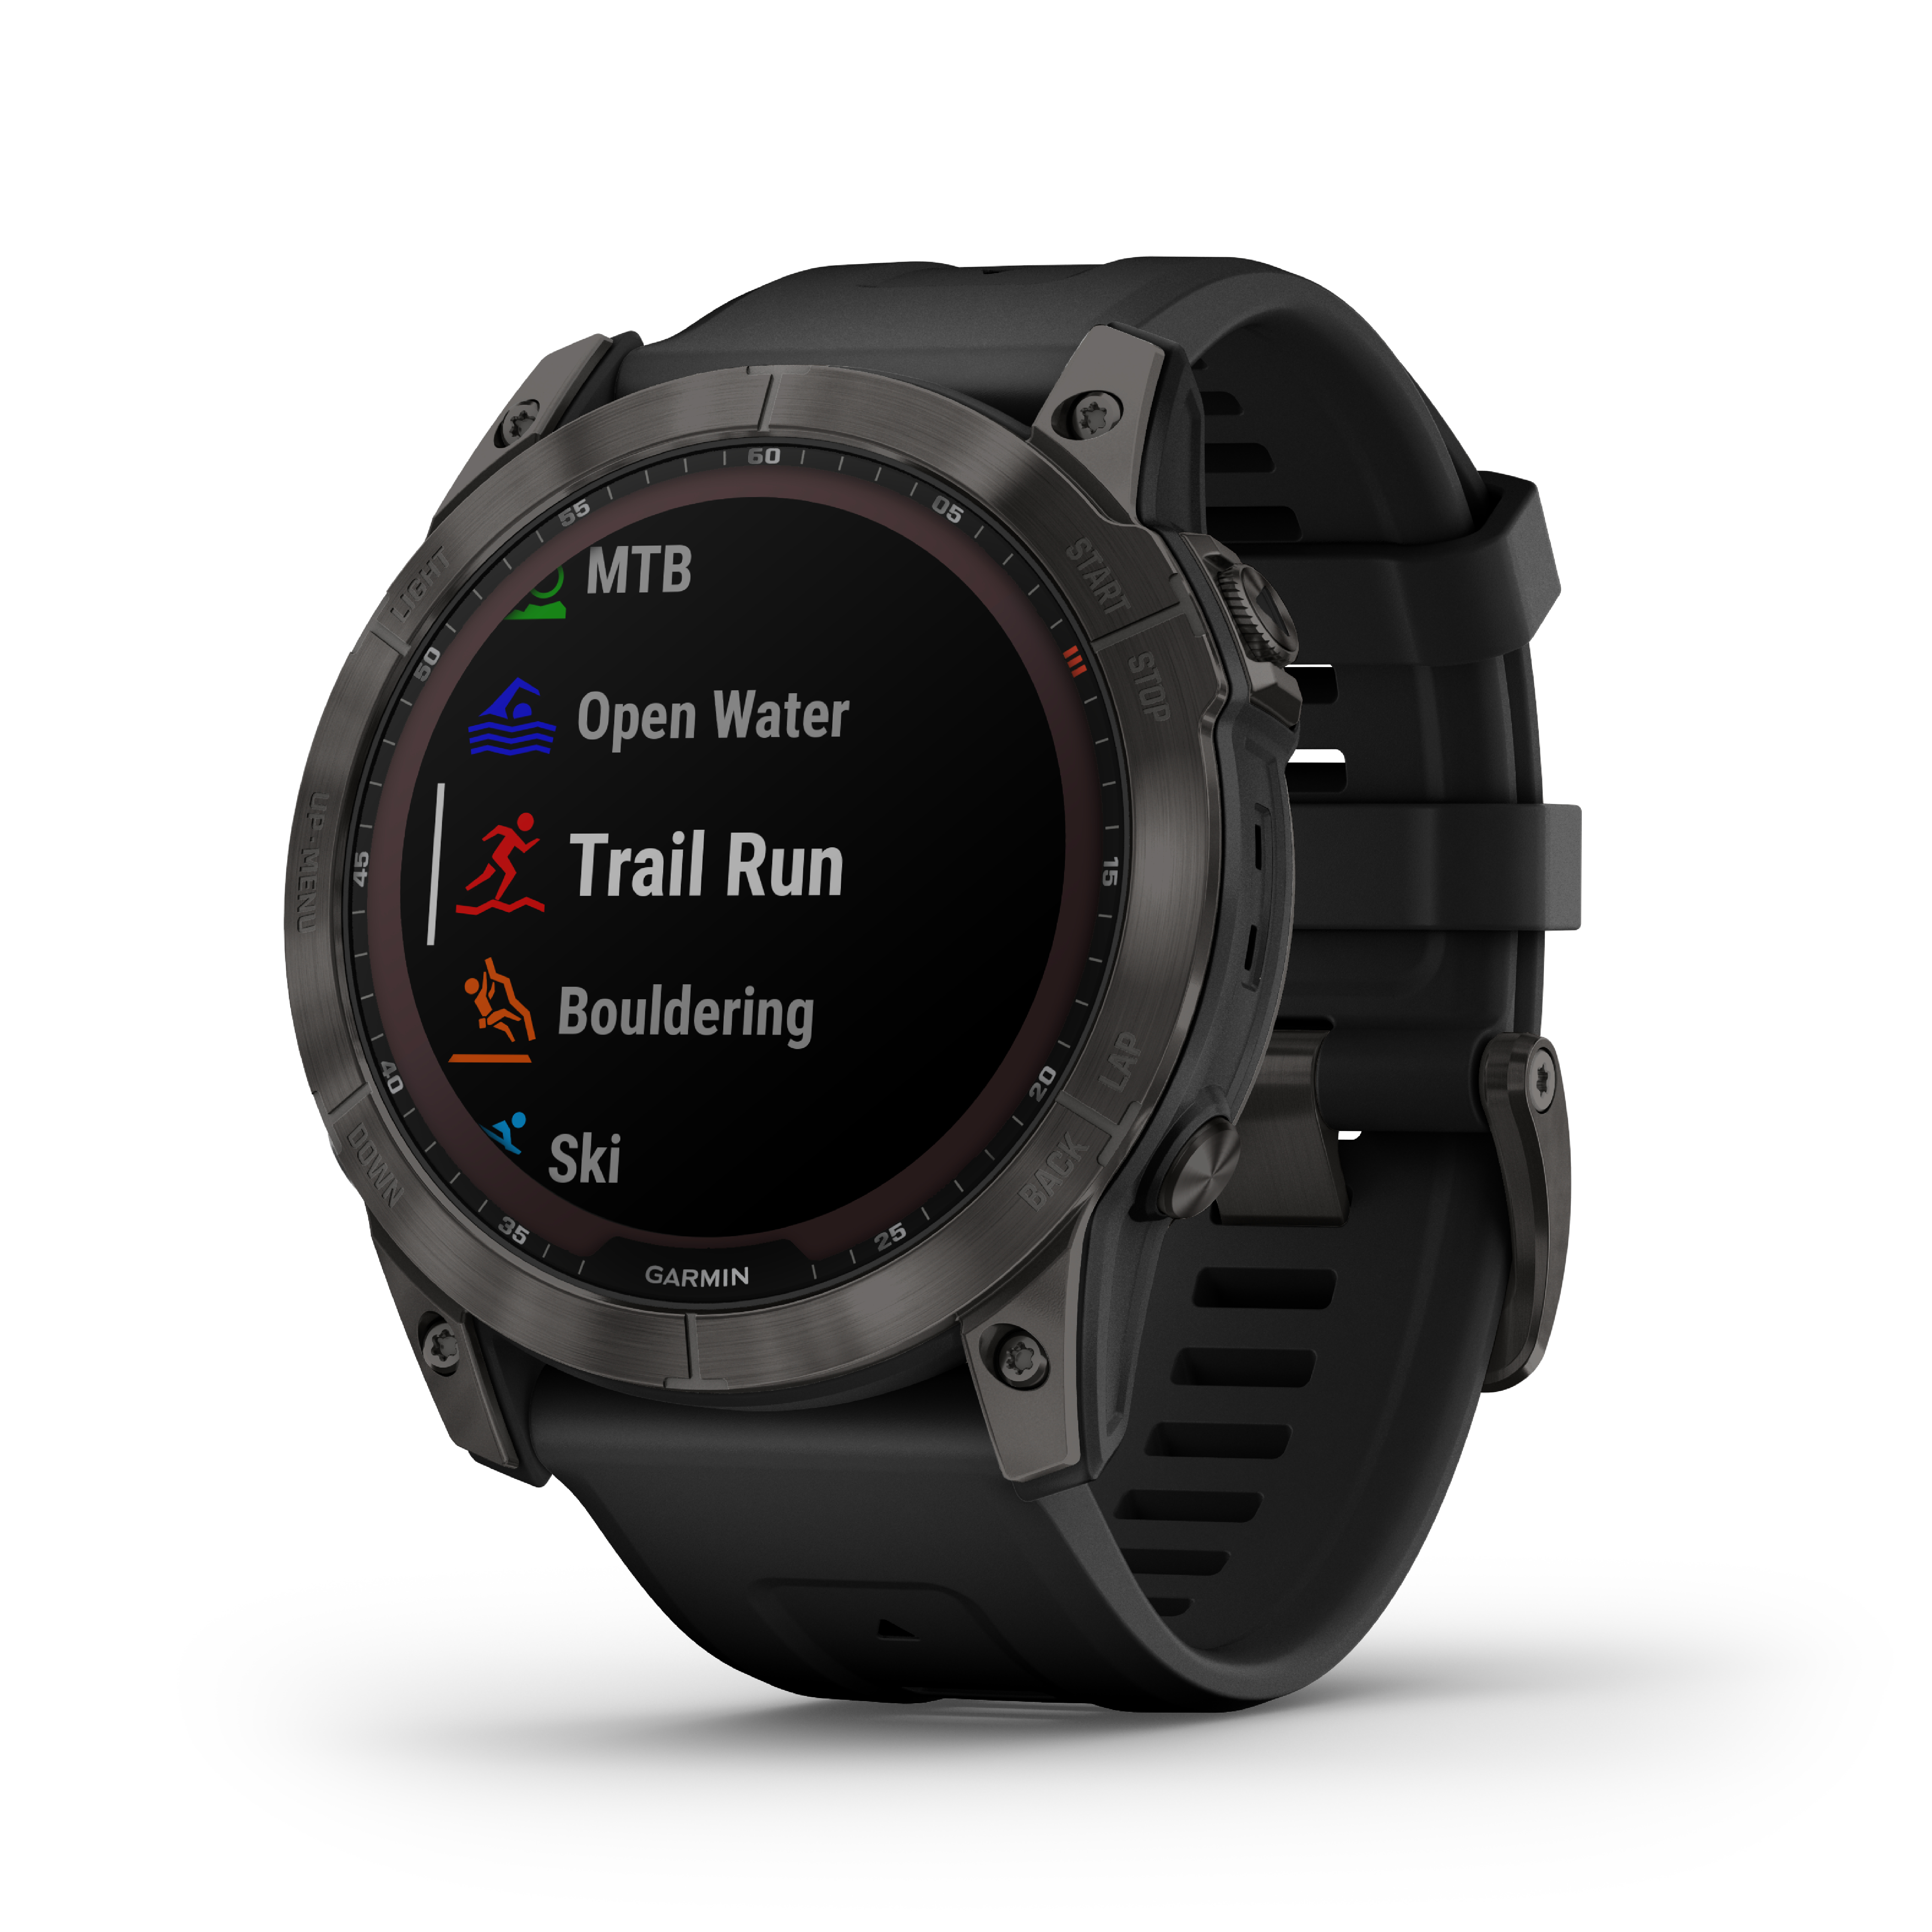 Tackle outdoor challenges easily with these newly launched Garmin smartwatches 2022 1